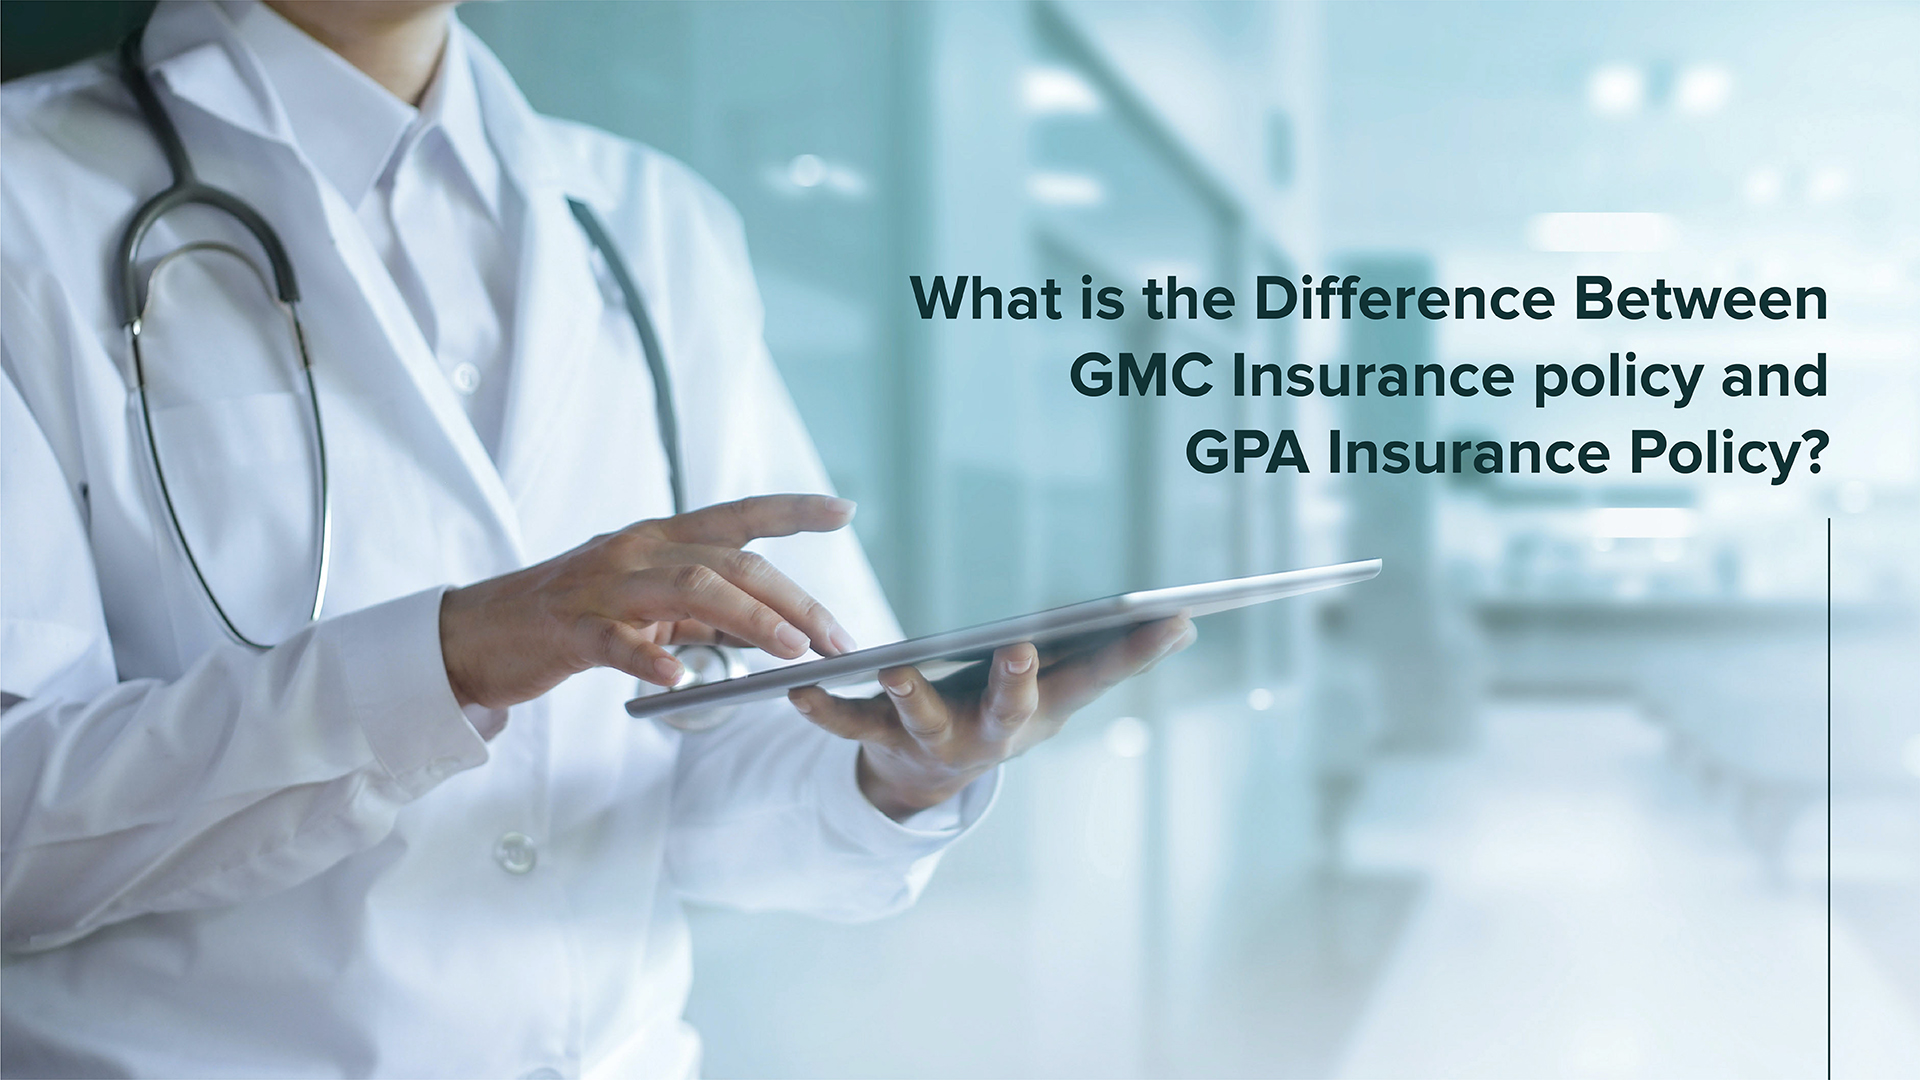 What is the Difference Between GMC Insurance policy and GPA Insurance Policy?